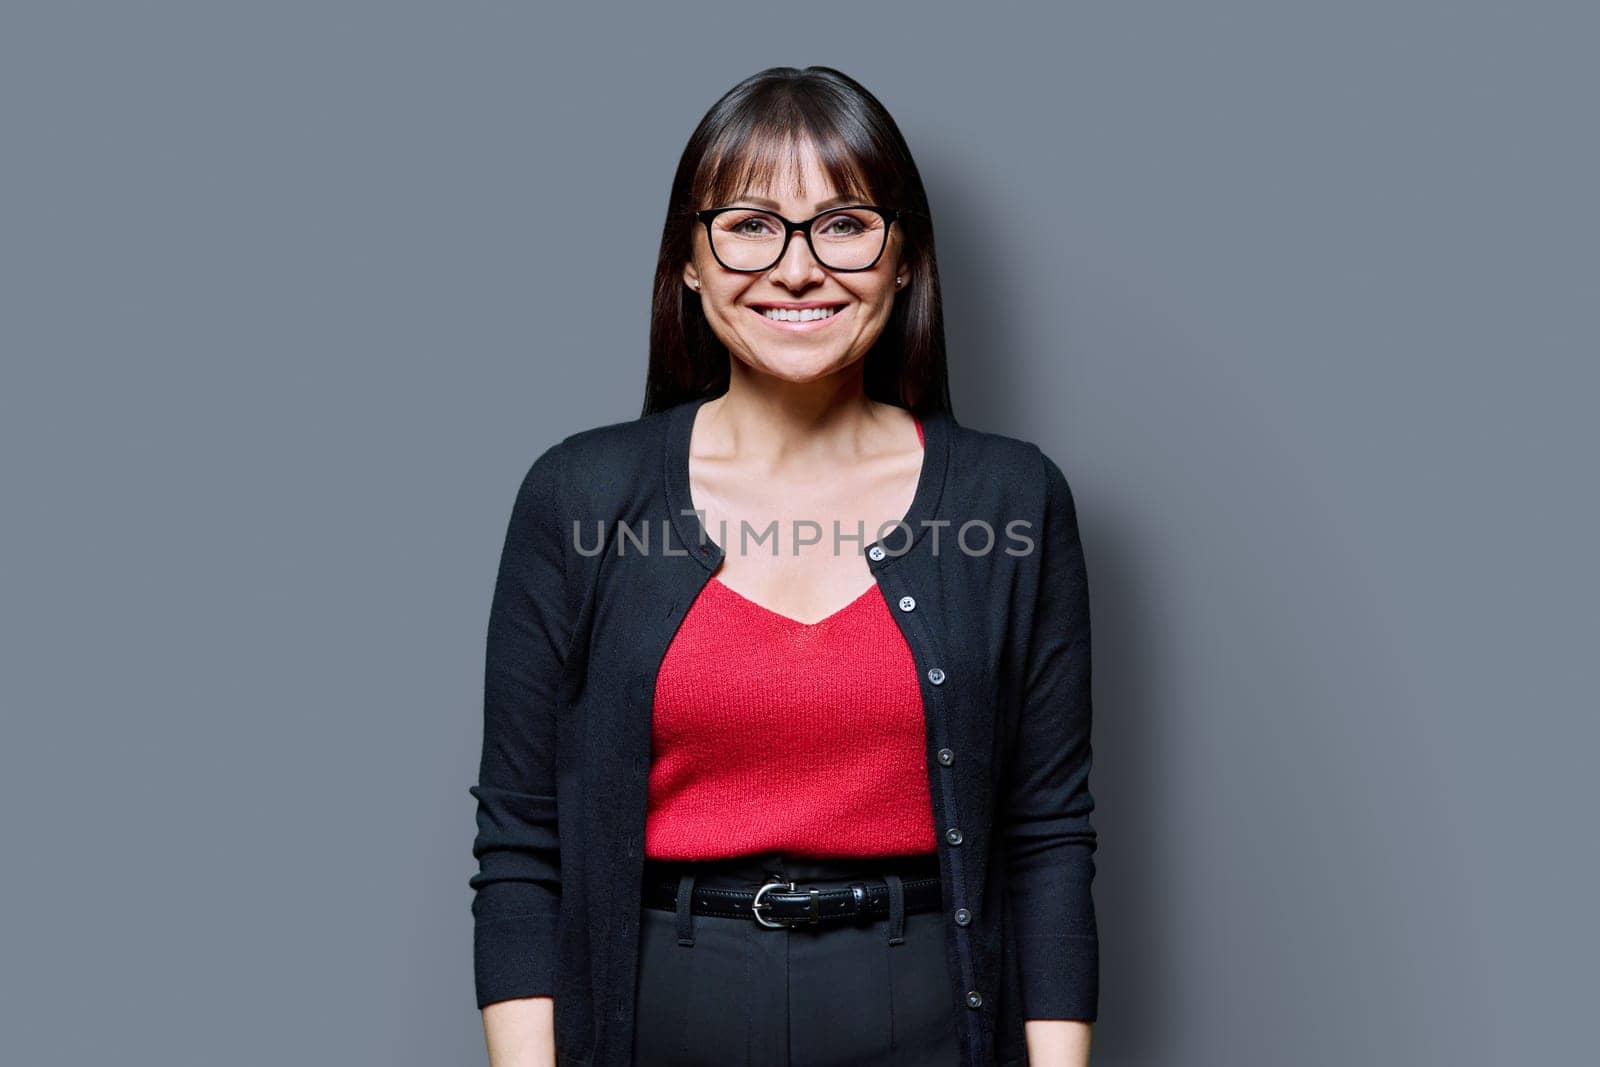 Smiling middle-aged woman on gray studio background. Happy 40s female with glasses looking at camera. Lifestyle, work, beauty, expertise, health, mature people concept